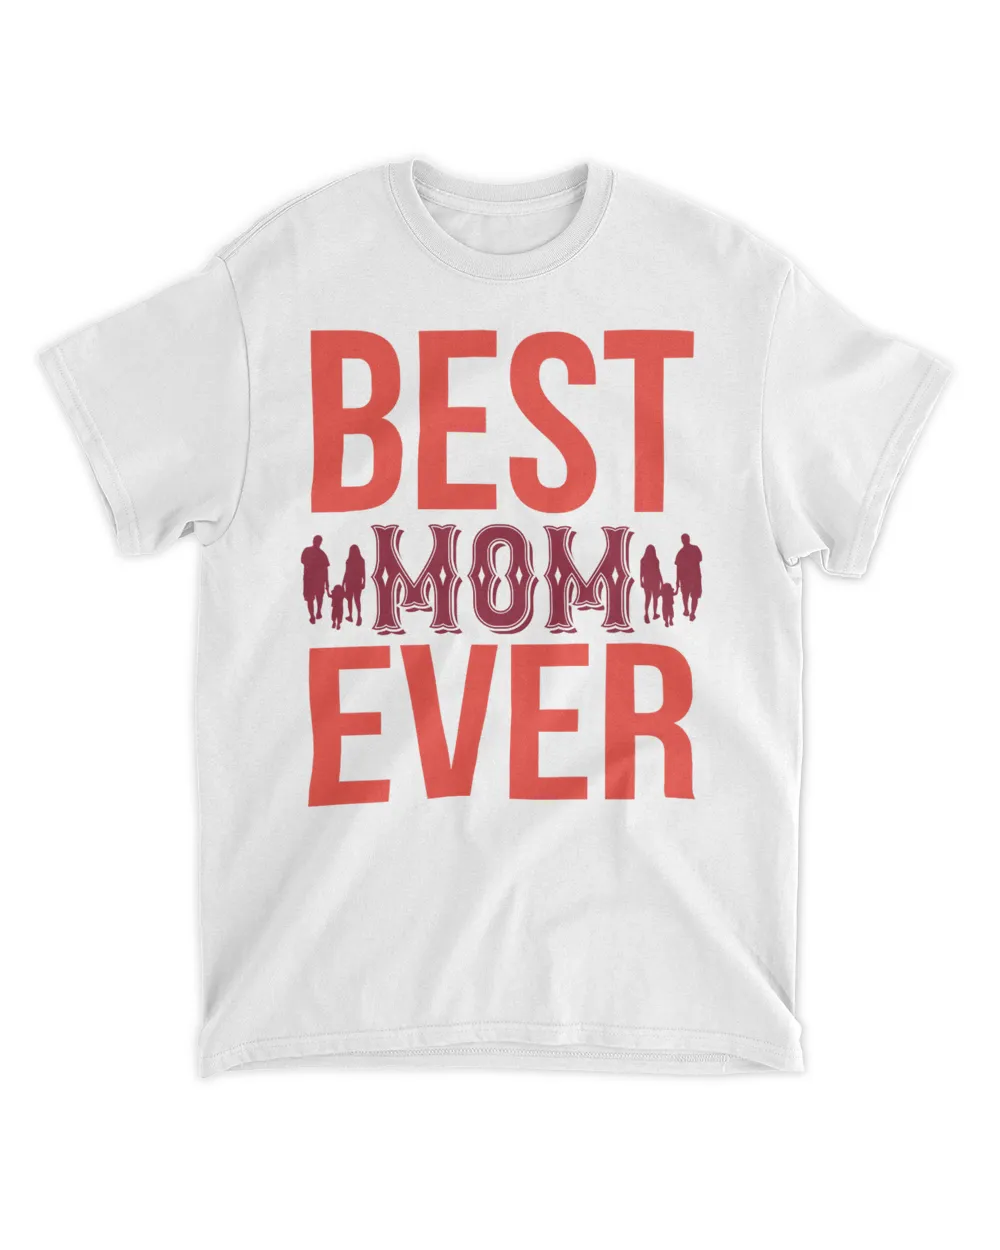 Family T-Shirt, Hoodie, Kids T-Shirt, Toodle & Infant Shirt, Gifts for your Family (6)